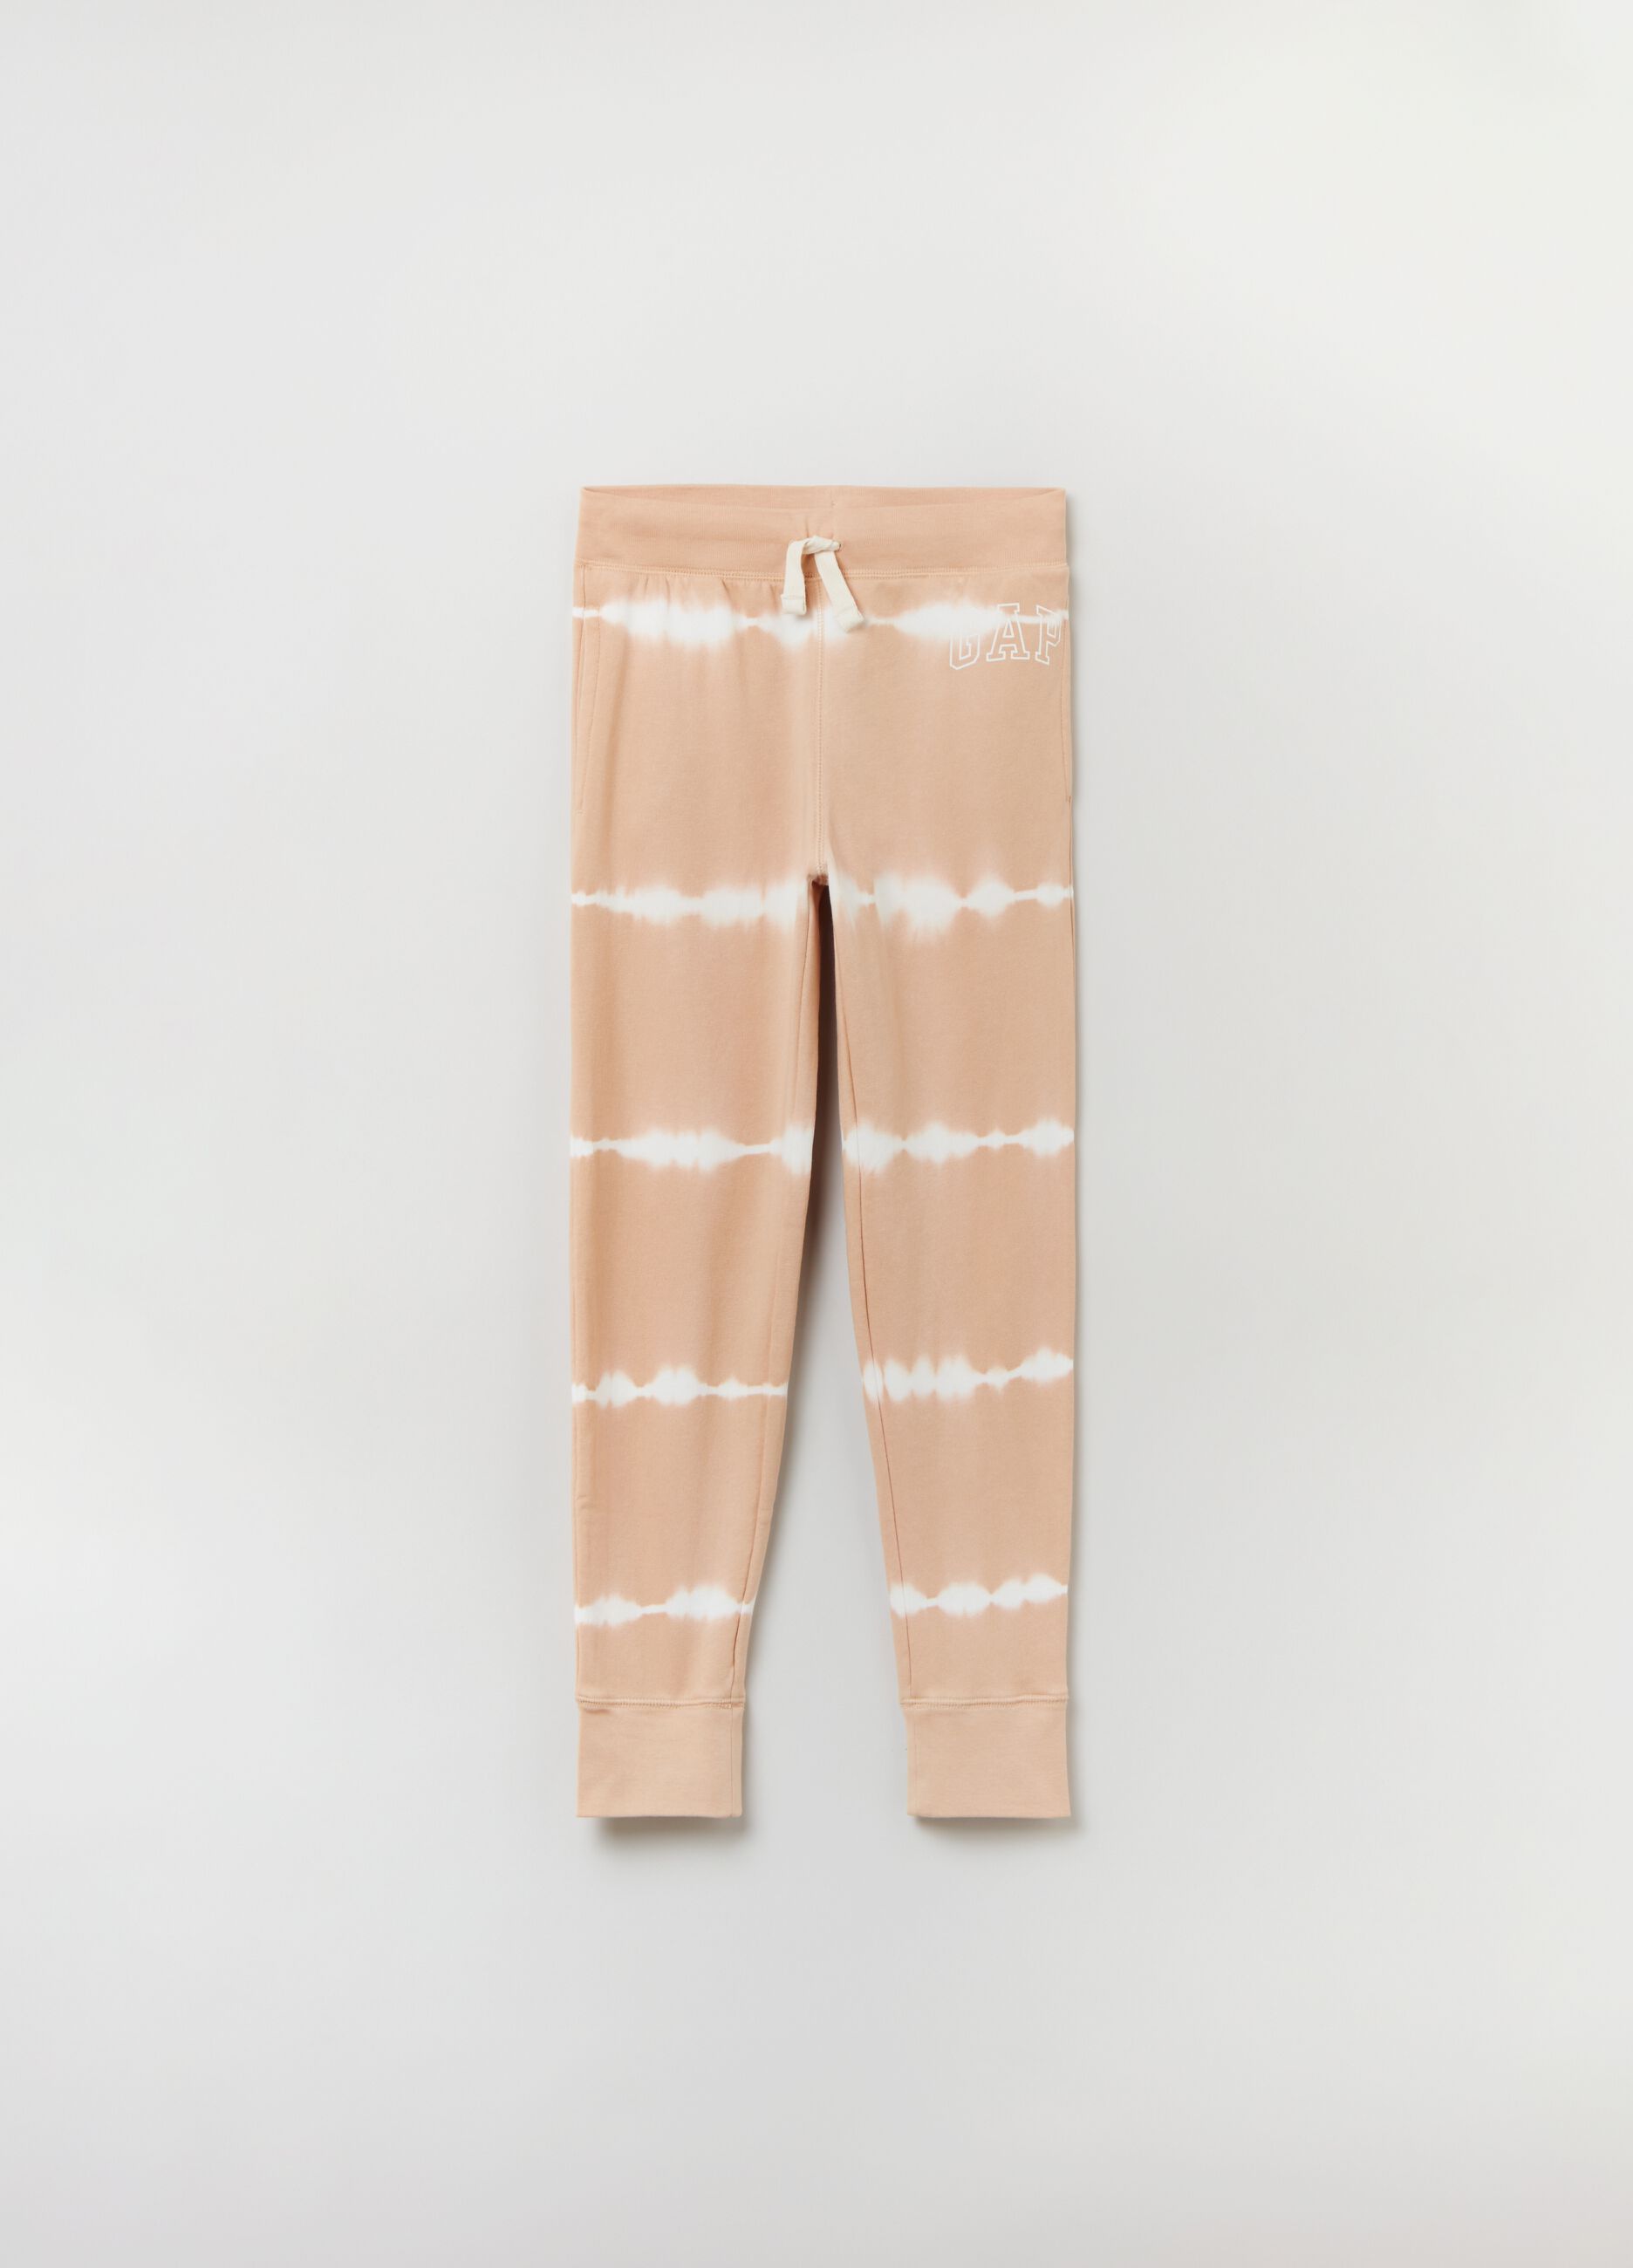 Tie Dye joggers with printed logo